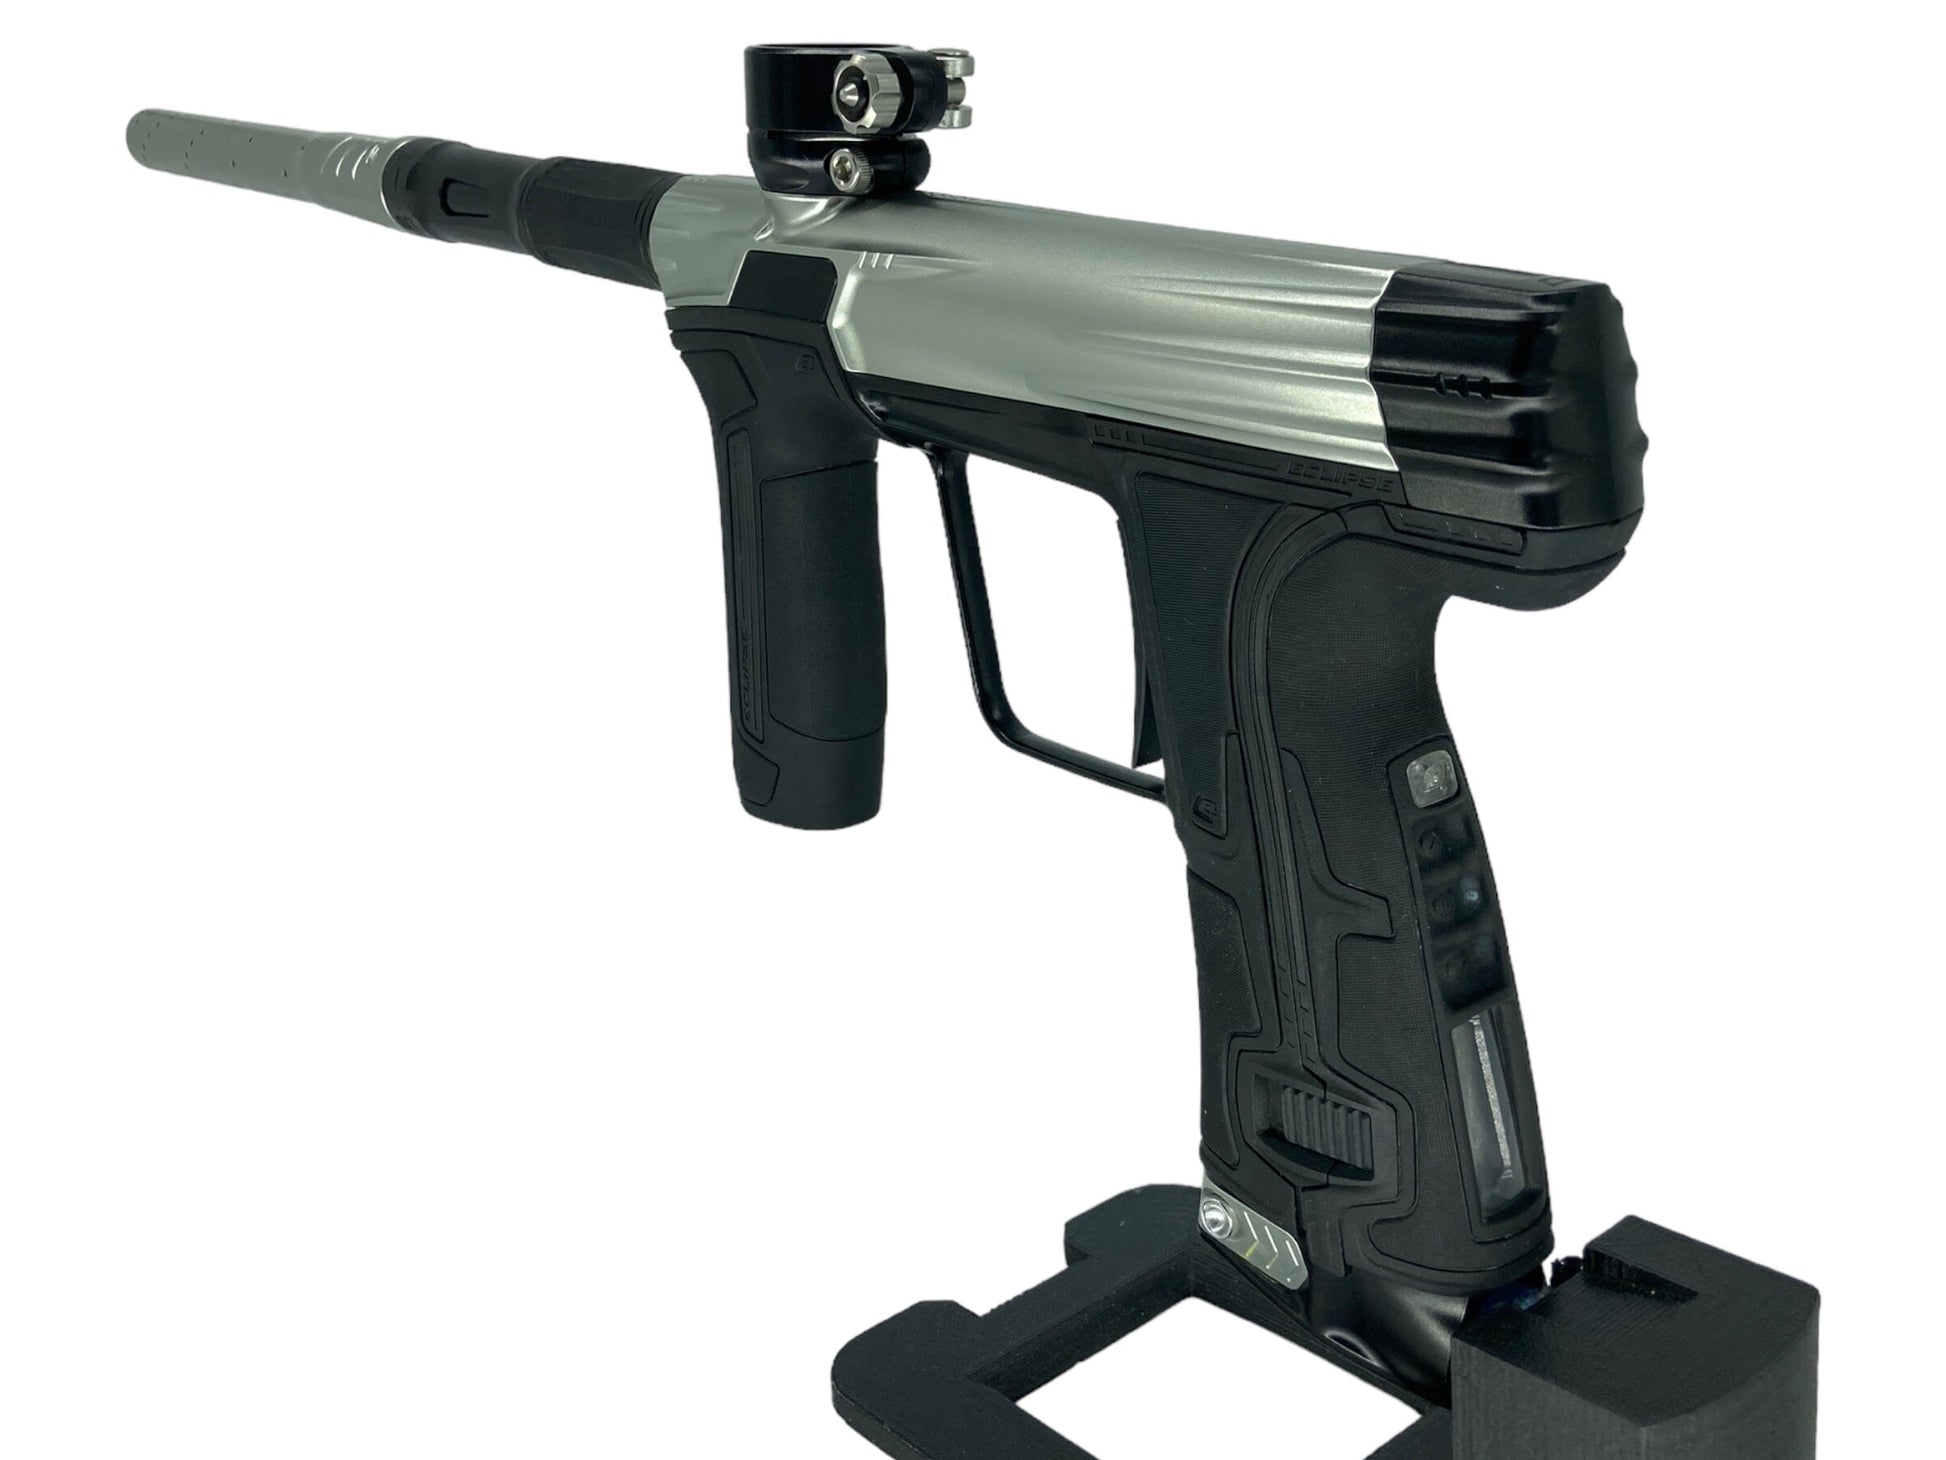 Used Planet Eclipse Cs3 Paintball Gun Paintball Gun from CPXBrosPaintball Buy/Sell/Trade Paintball Markers, New Paintball Guns, Paintball Hoppers, Paintball Masks, and Hormesis Headbands